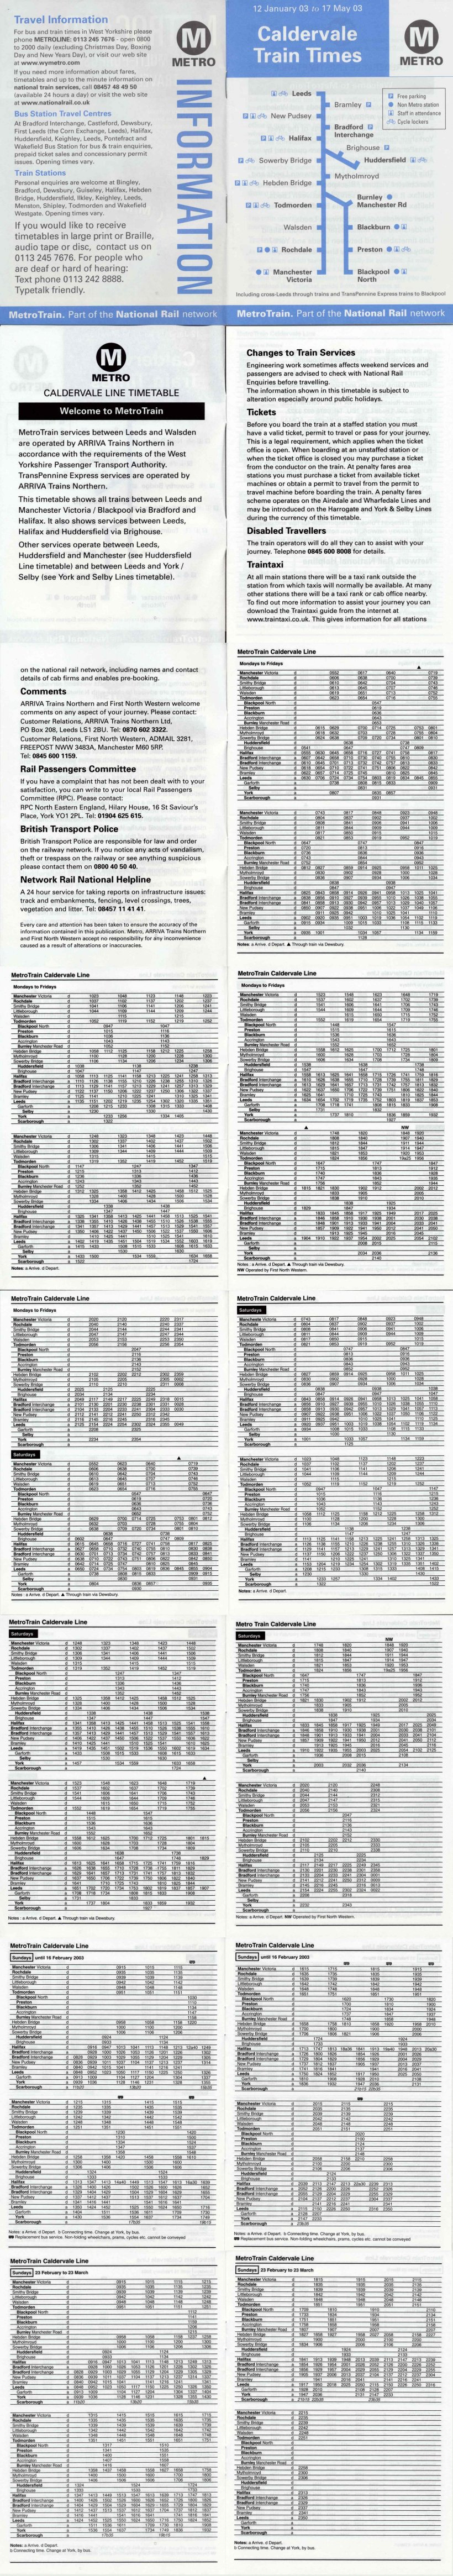 Metro pocket timetable Caldervale Train Times 12 January 2003 to 17 May 2003 Part 1